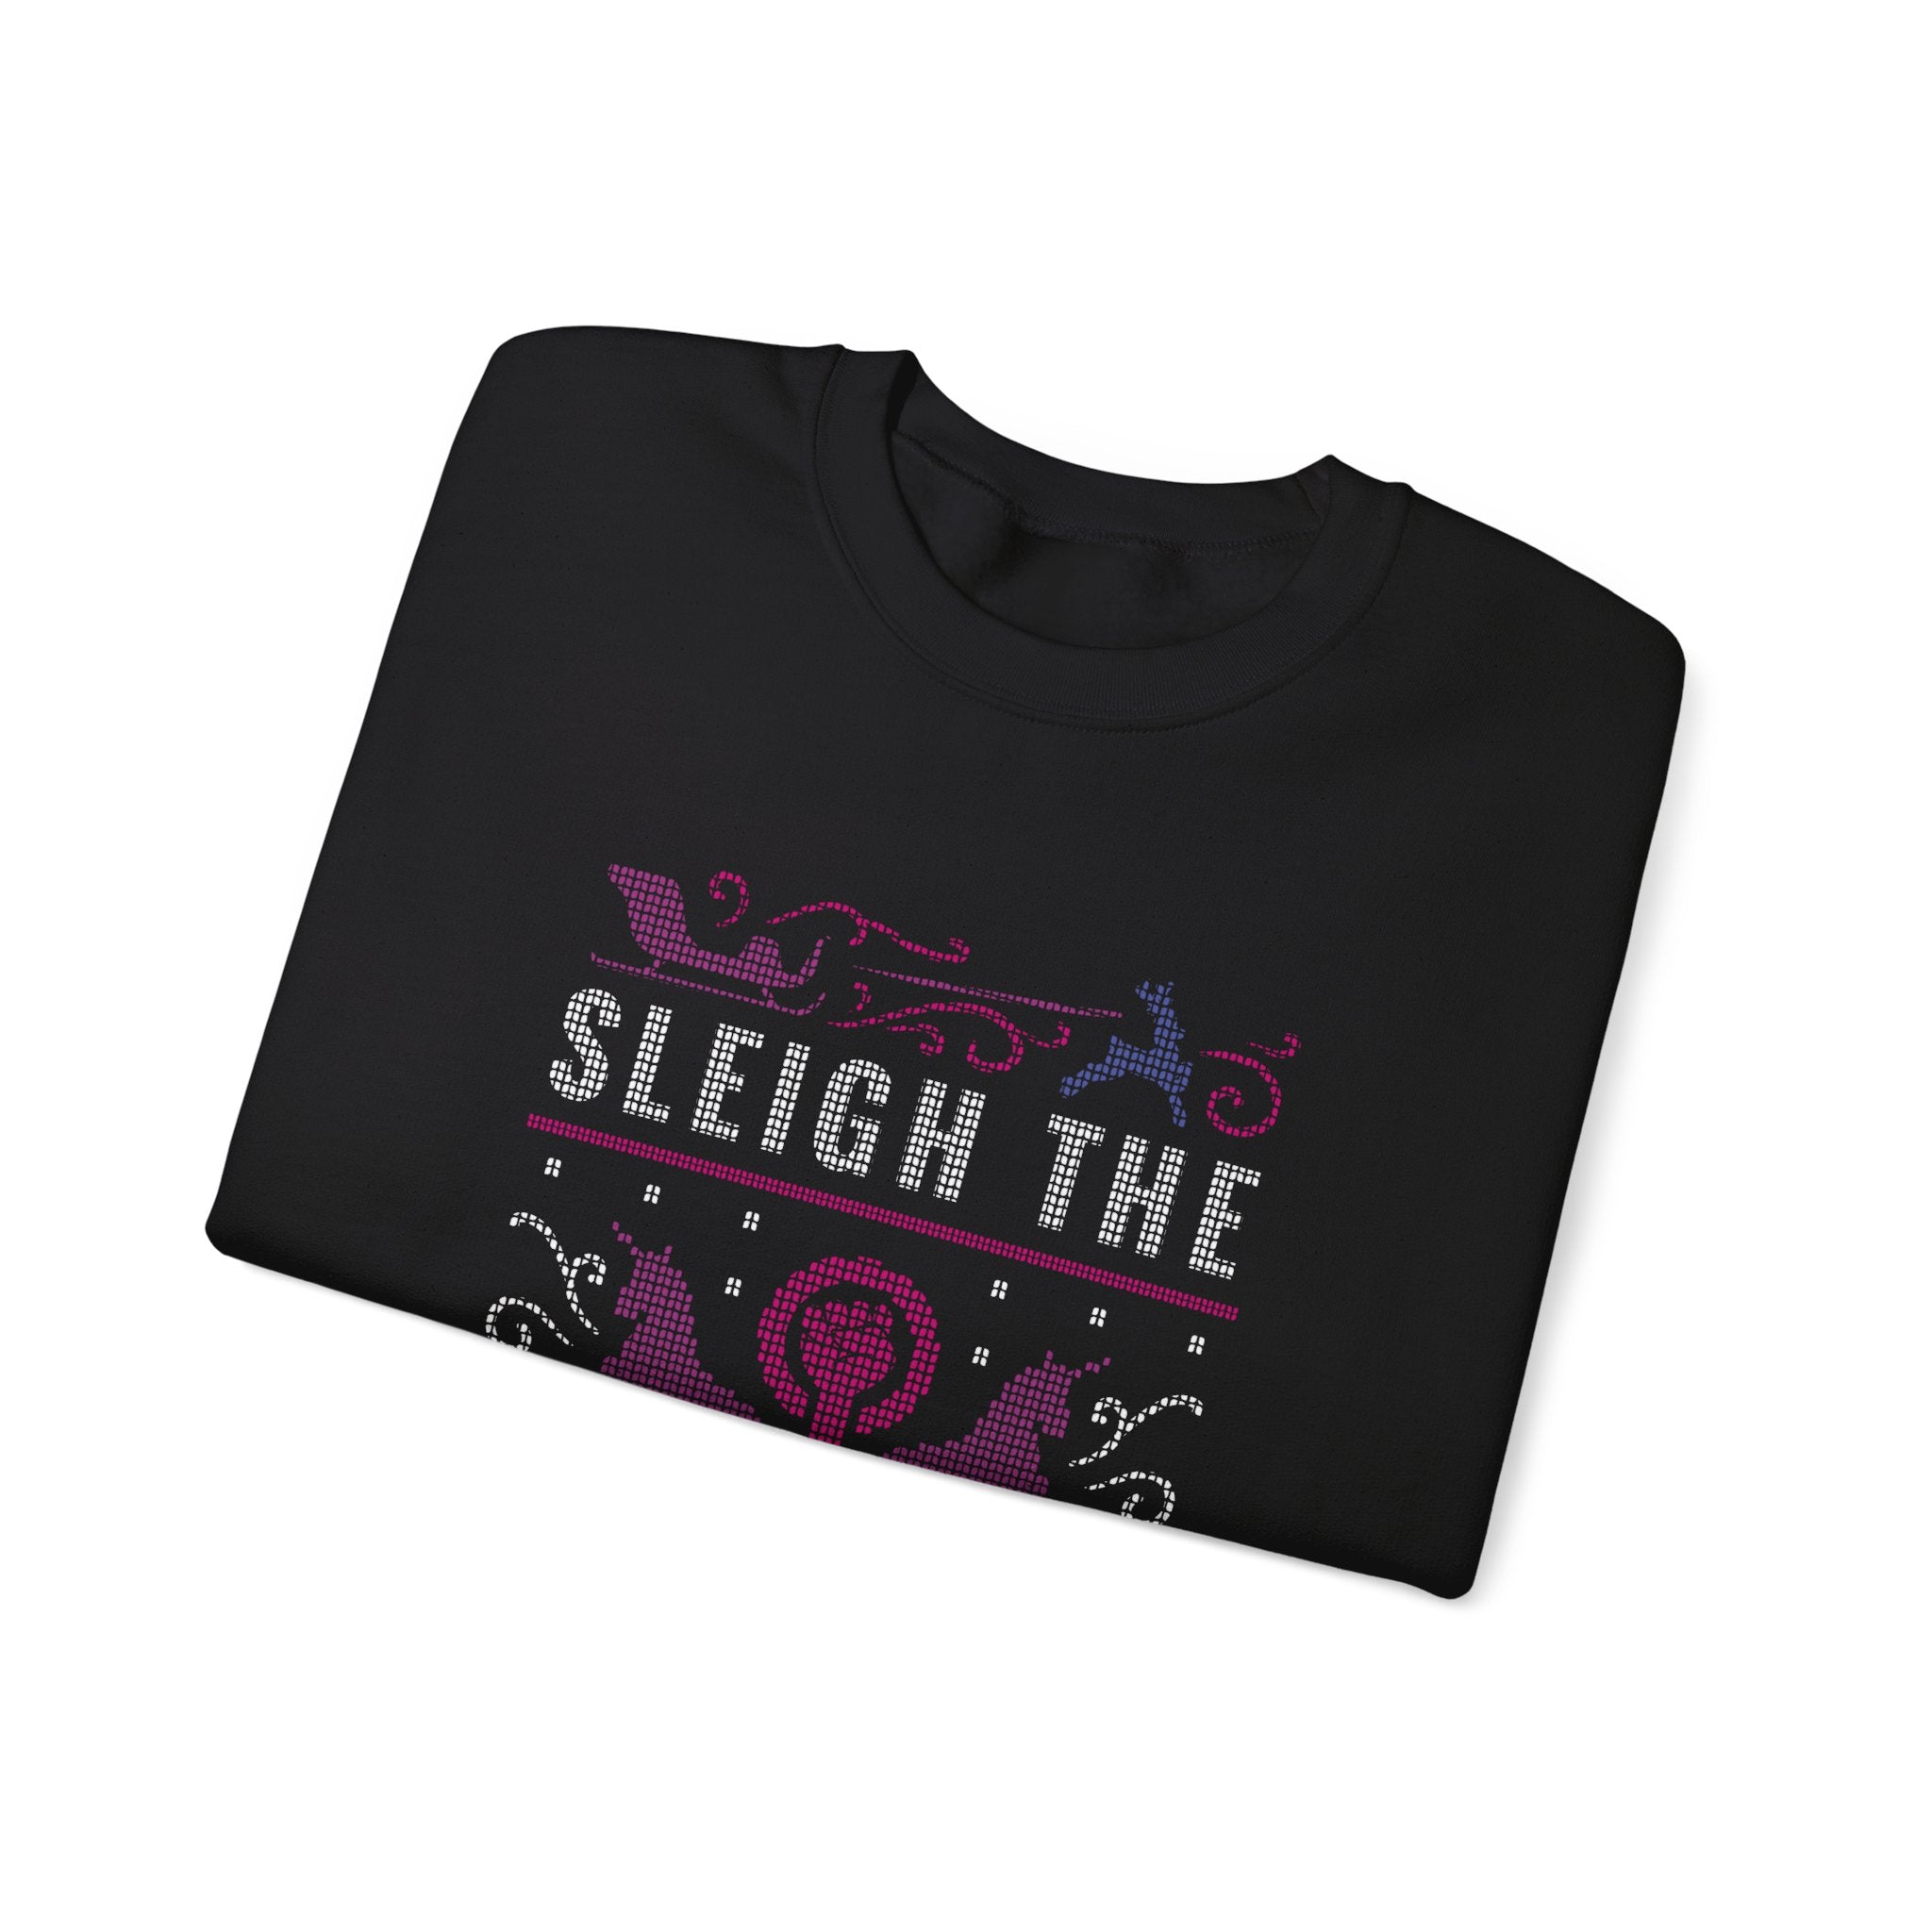 Sleigh The Patriarchy Quote Ugly Sweater -  Sweatshirt